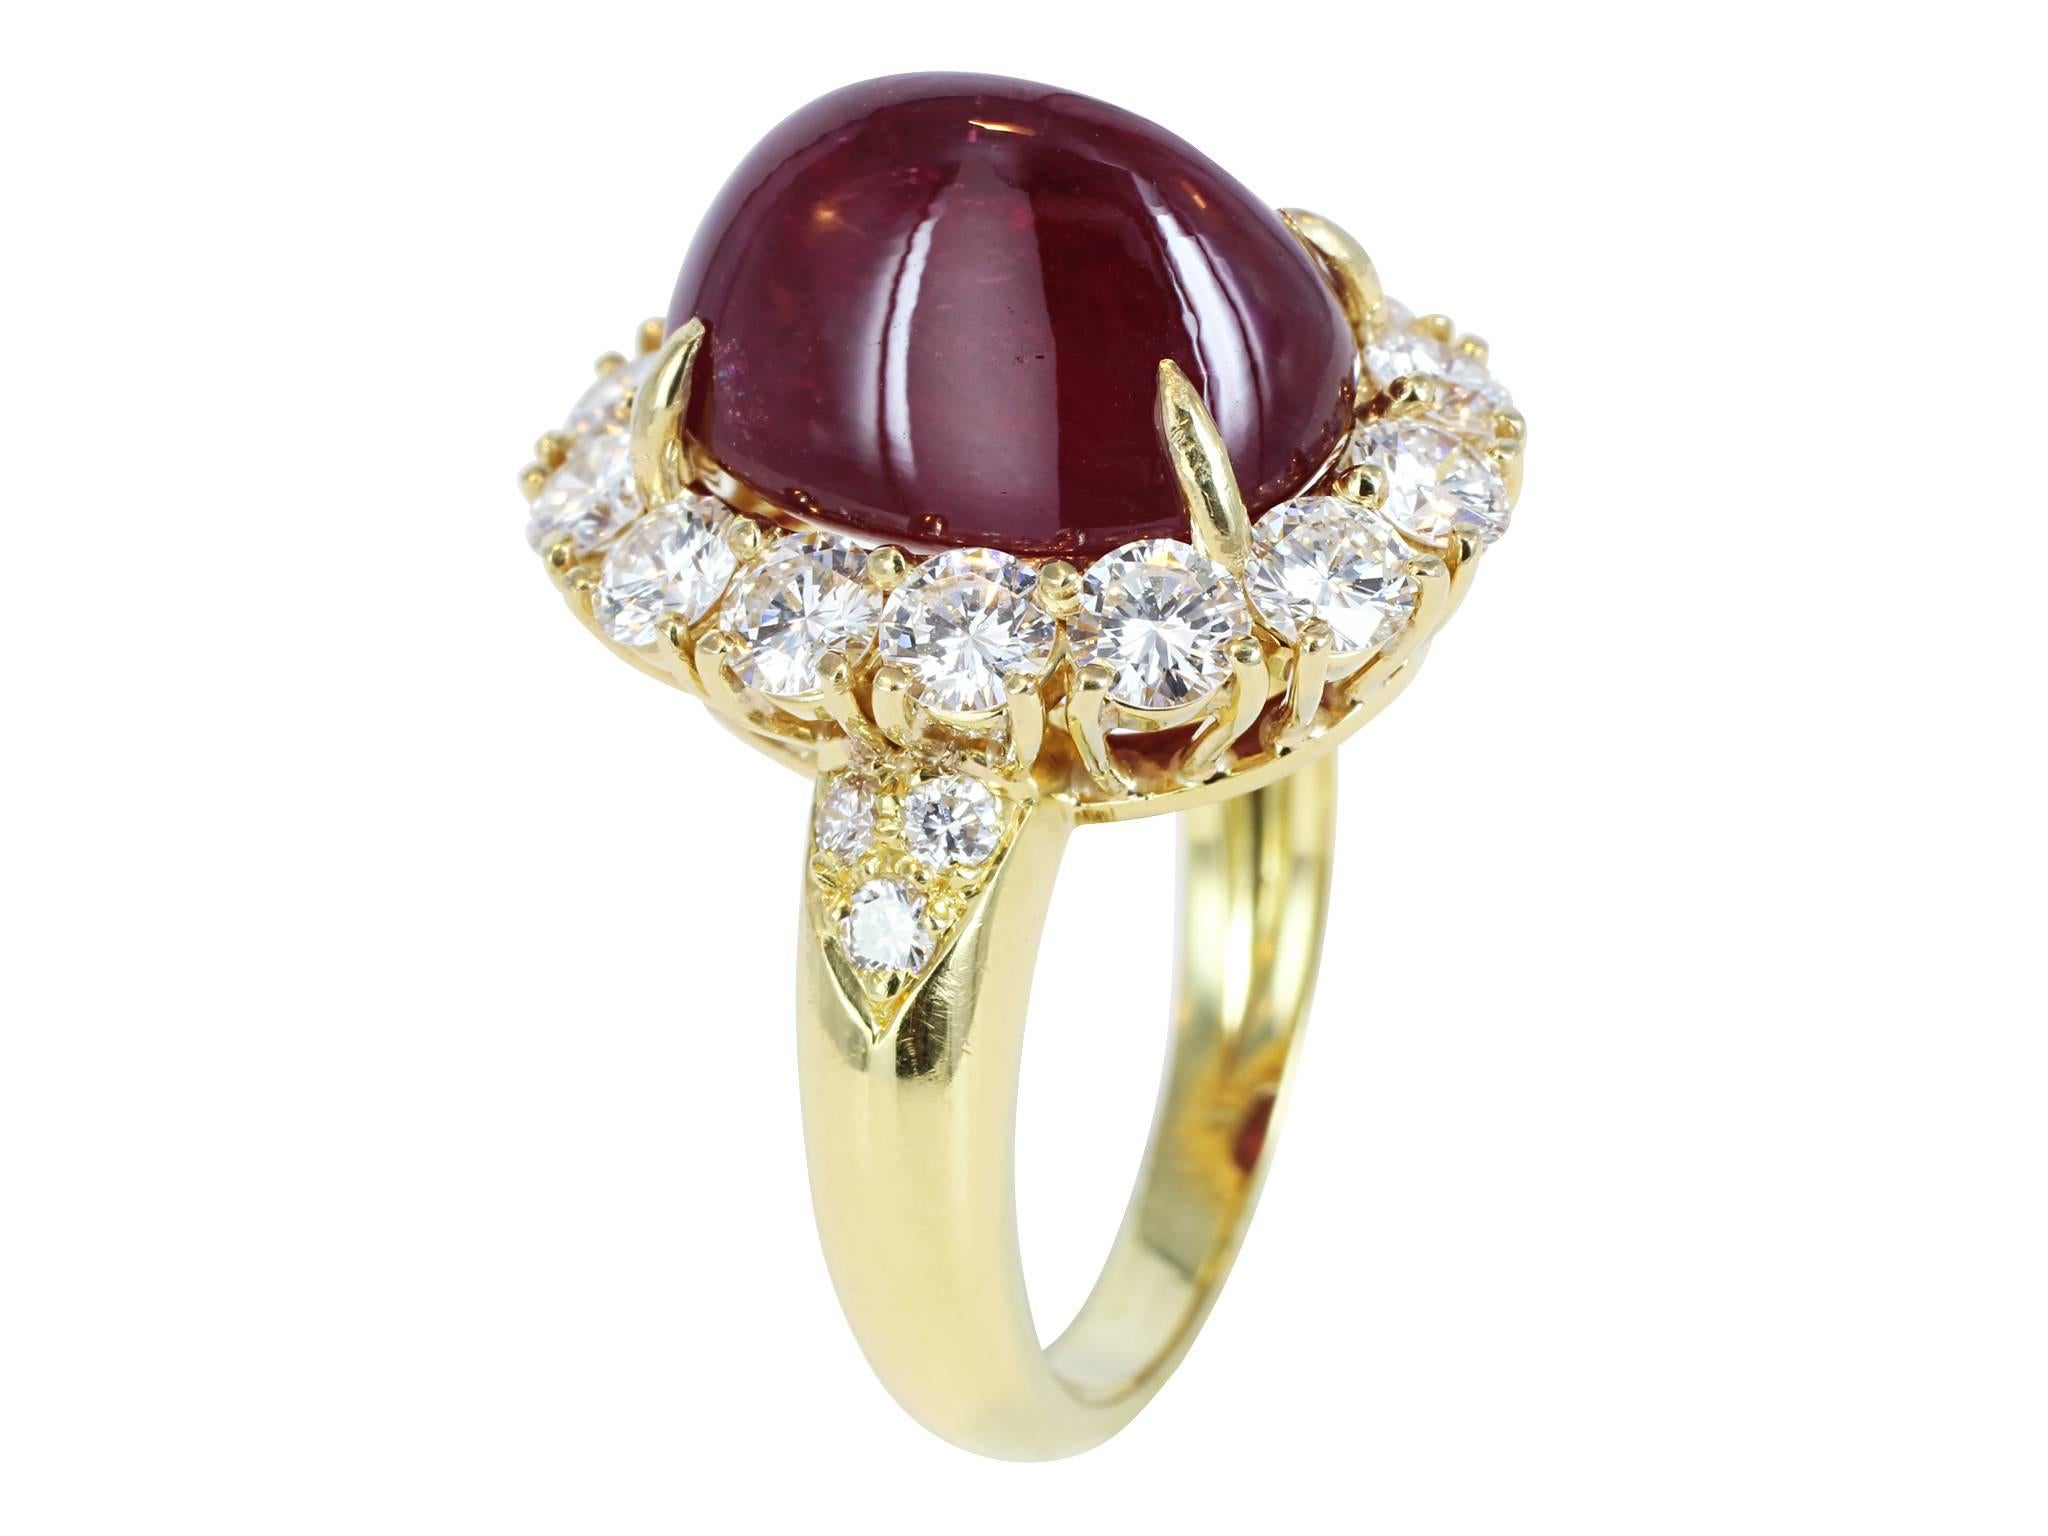 Estate Van Cleef and Arpels 18 karat yellow gold cluster ring consisting of 1 oval sugar loaf cabochon cut Thai ruby weighing 9.42 carats, with AGL report CS 53499. The center stone is surrounded with 14 round brilliant cut diamonds and a total of 6